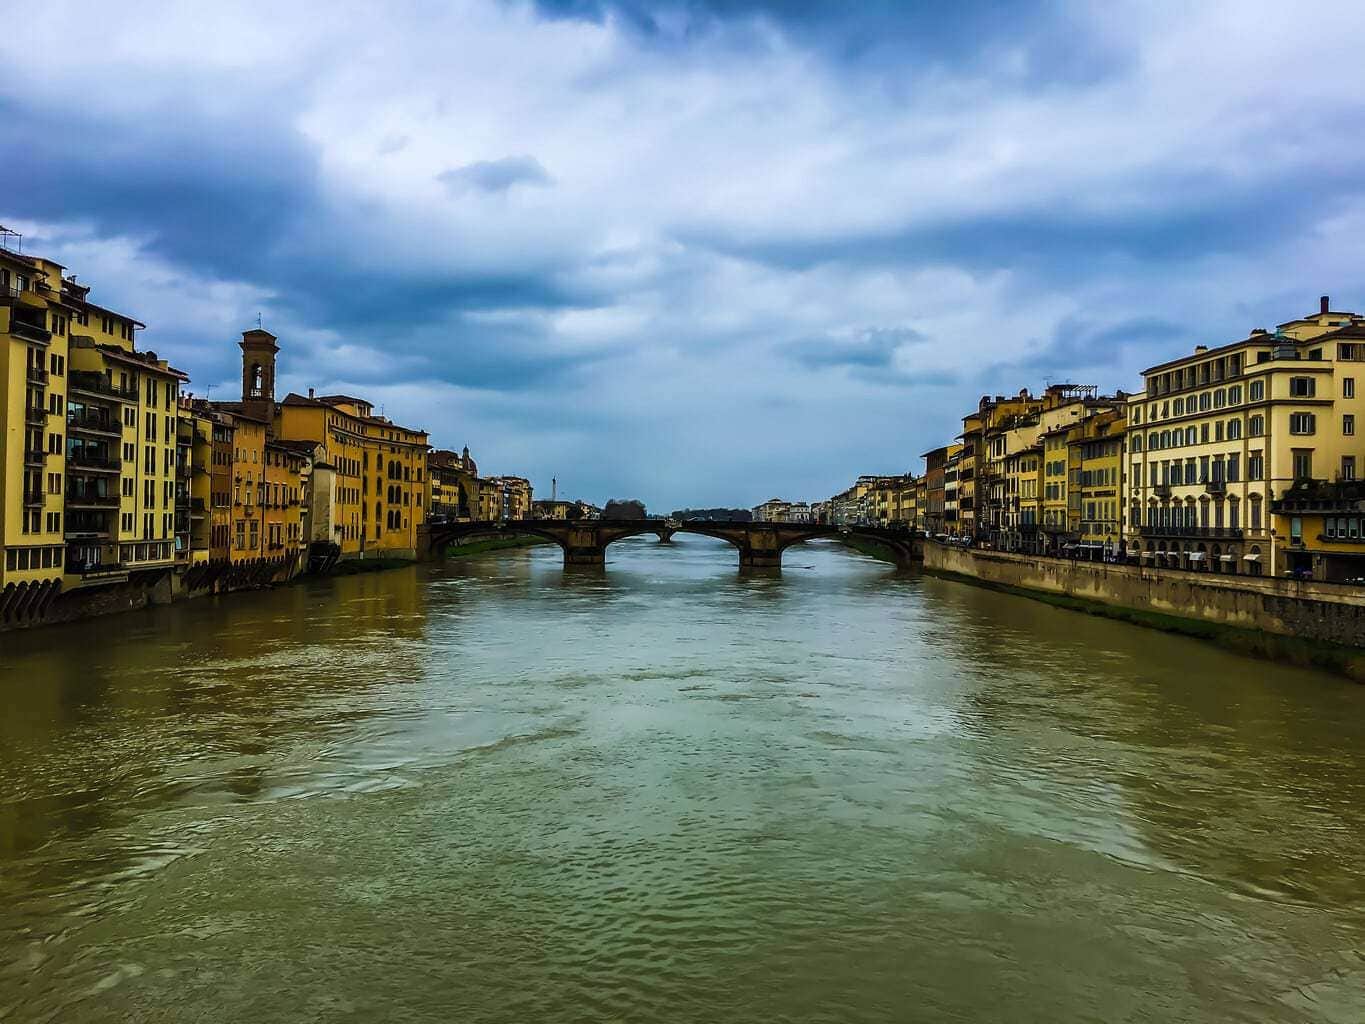 Tours with Kids: A LivItaly Private Food Tour of Florence including Gelato Making